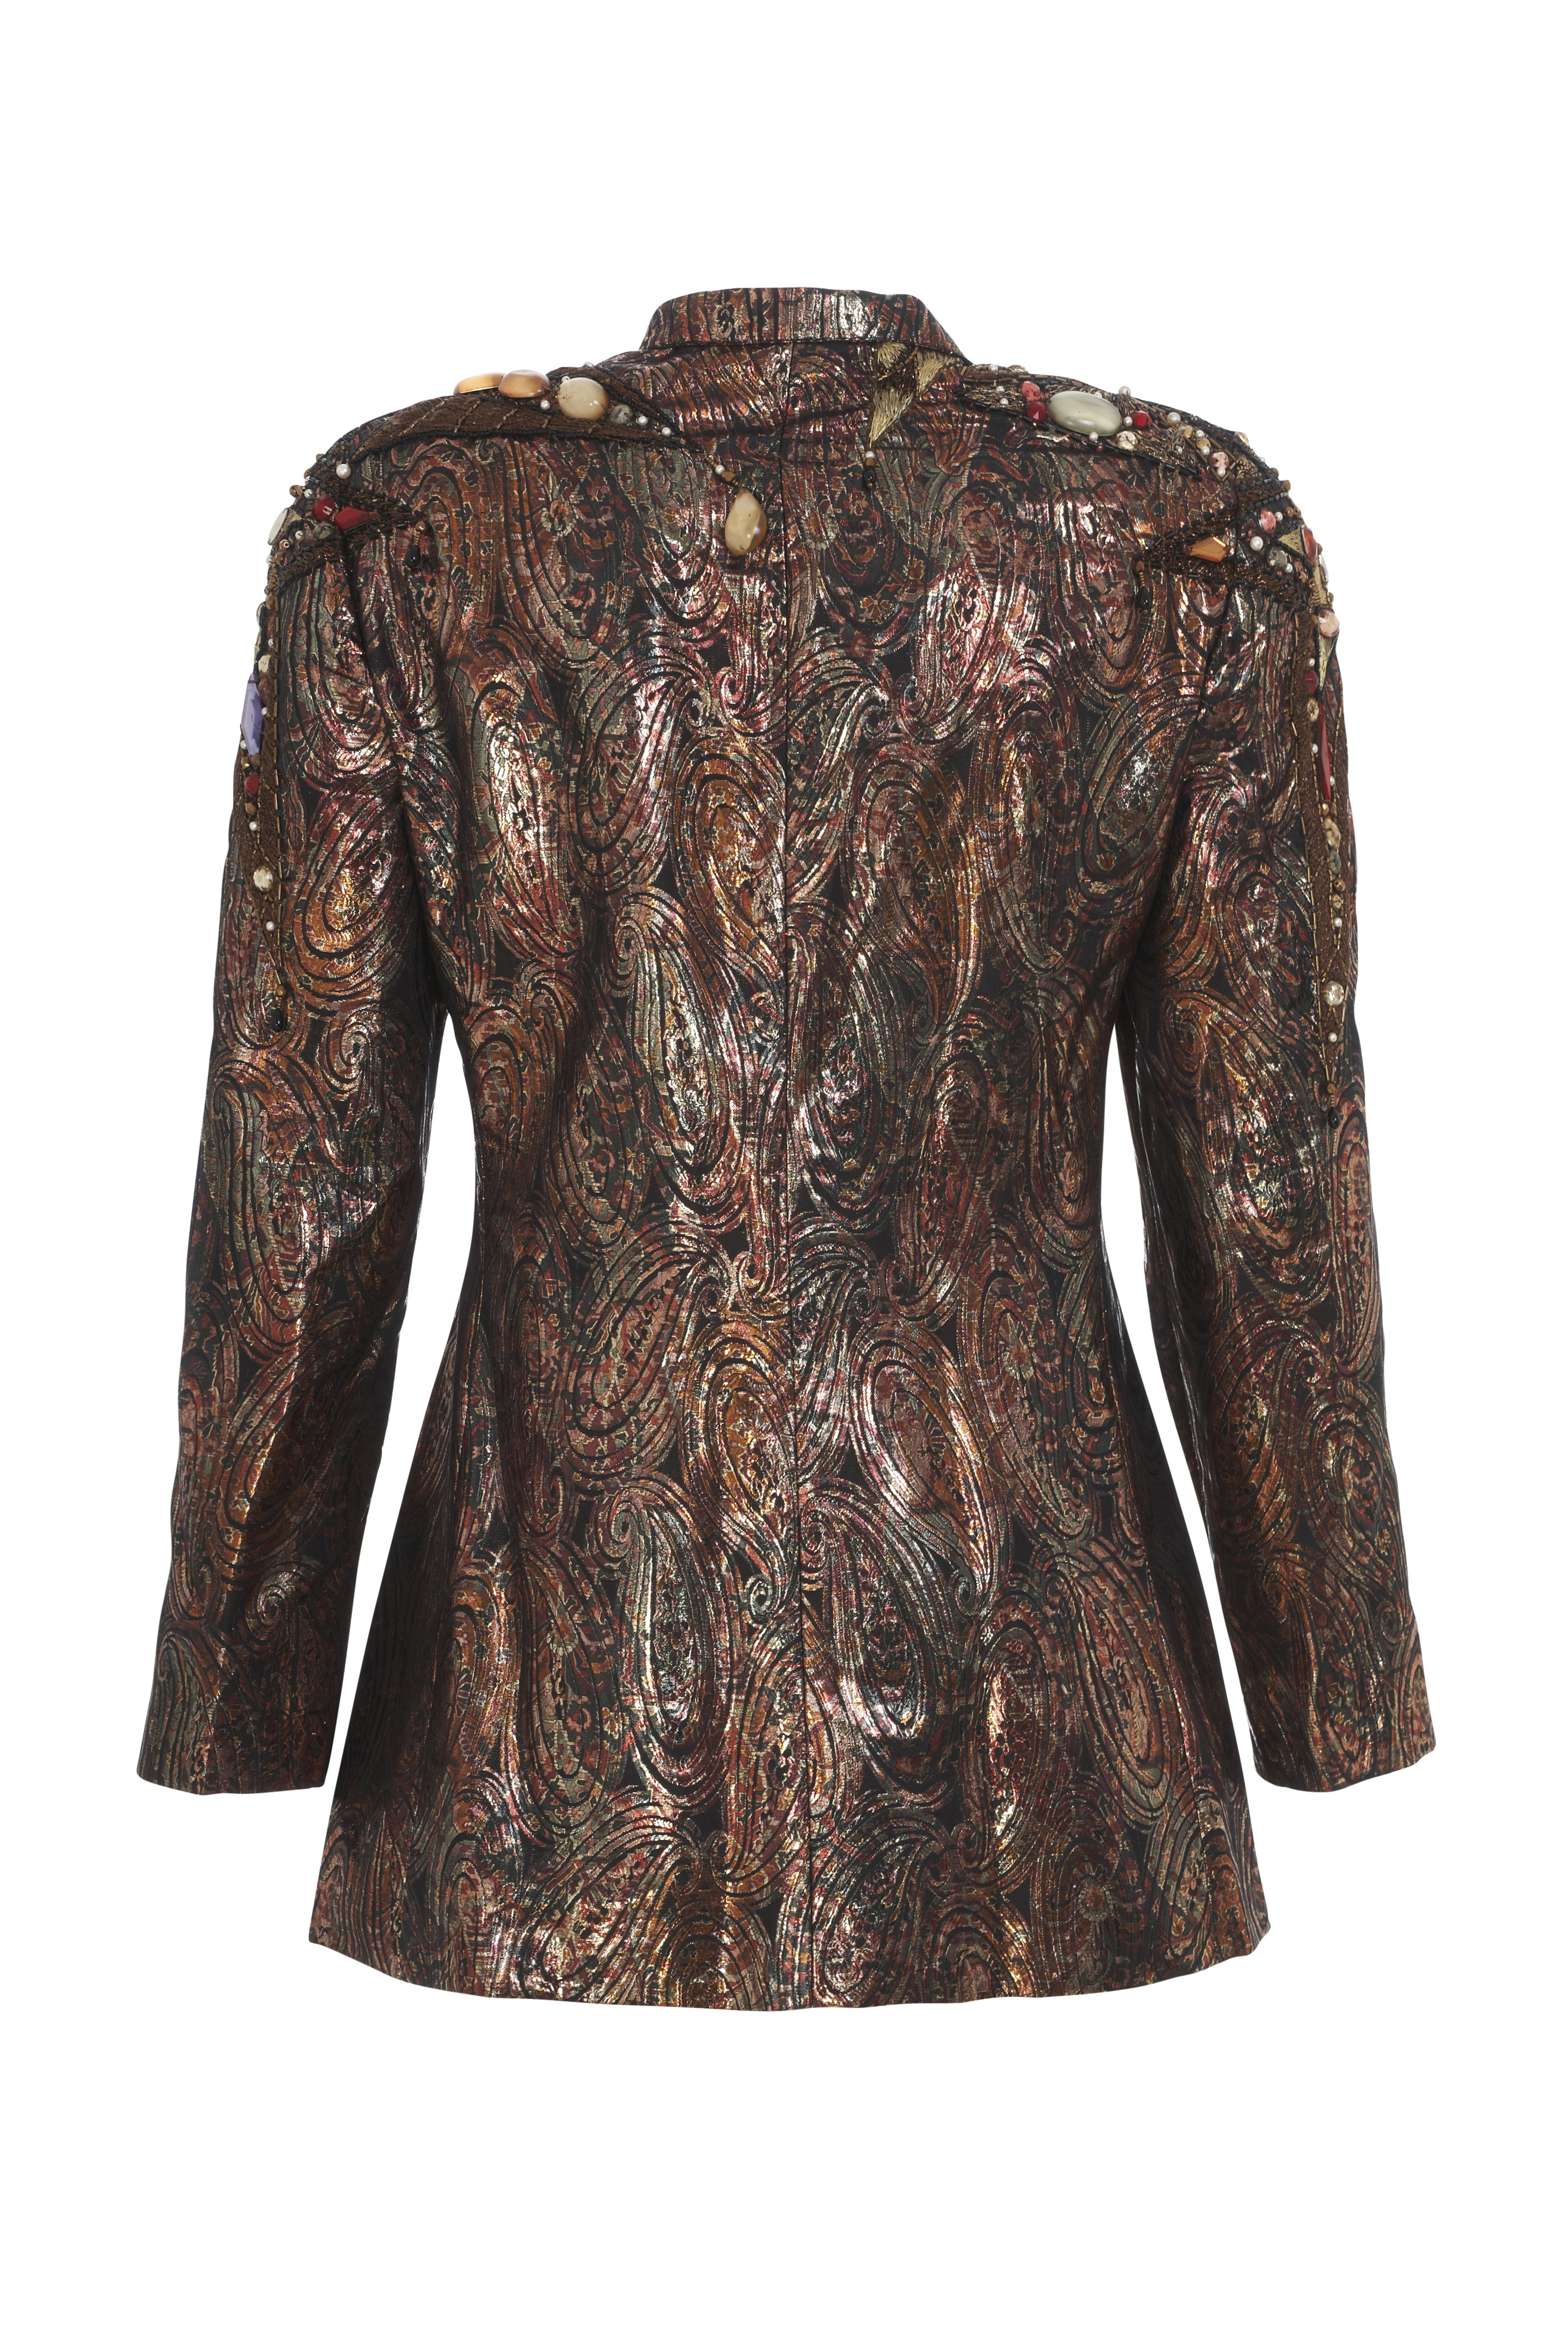 Krizia 1980's bejeweled bronze paisley jacket | Curate8